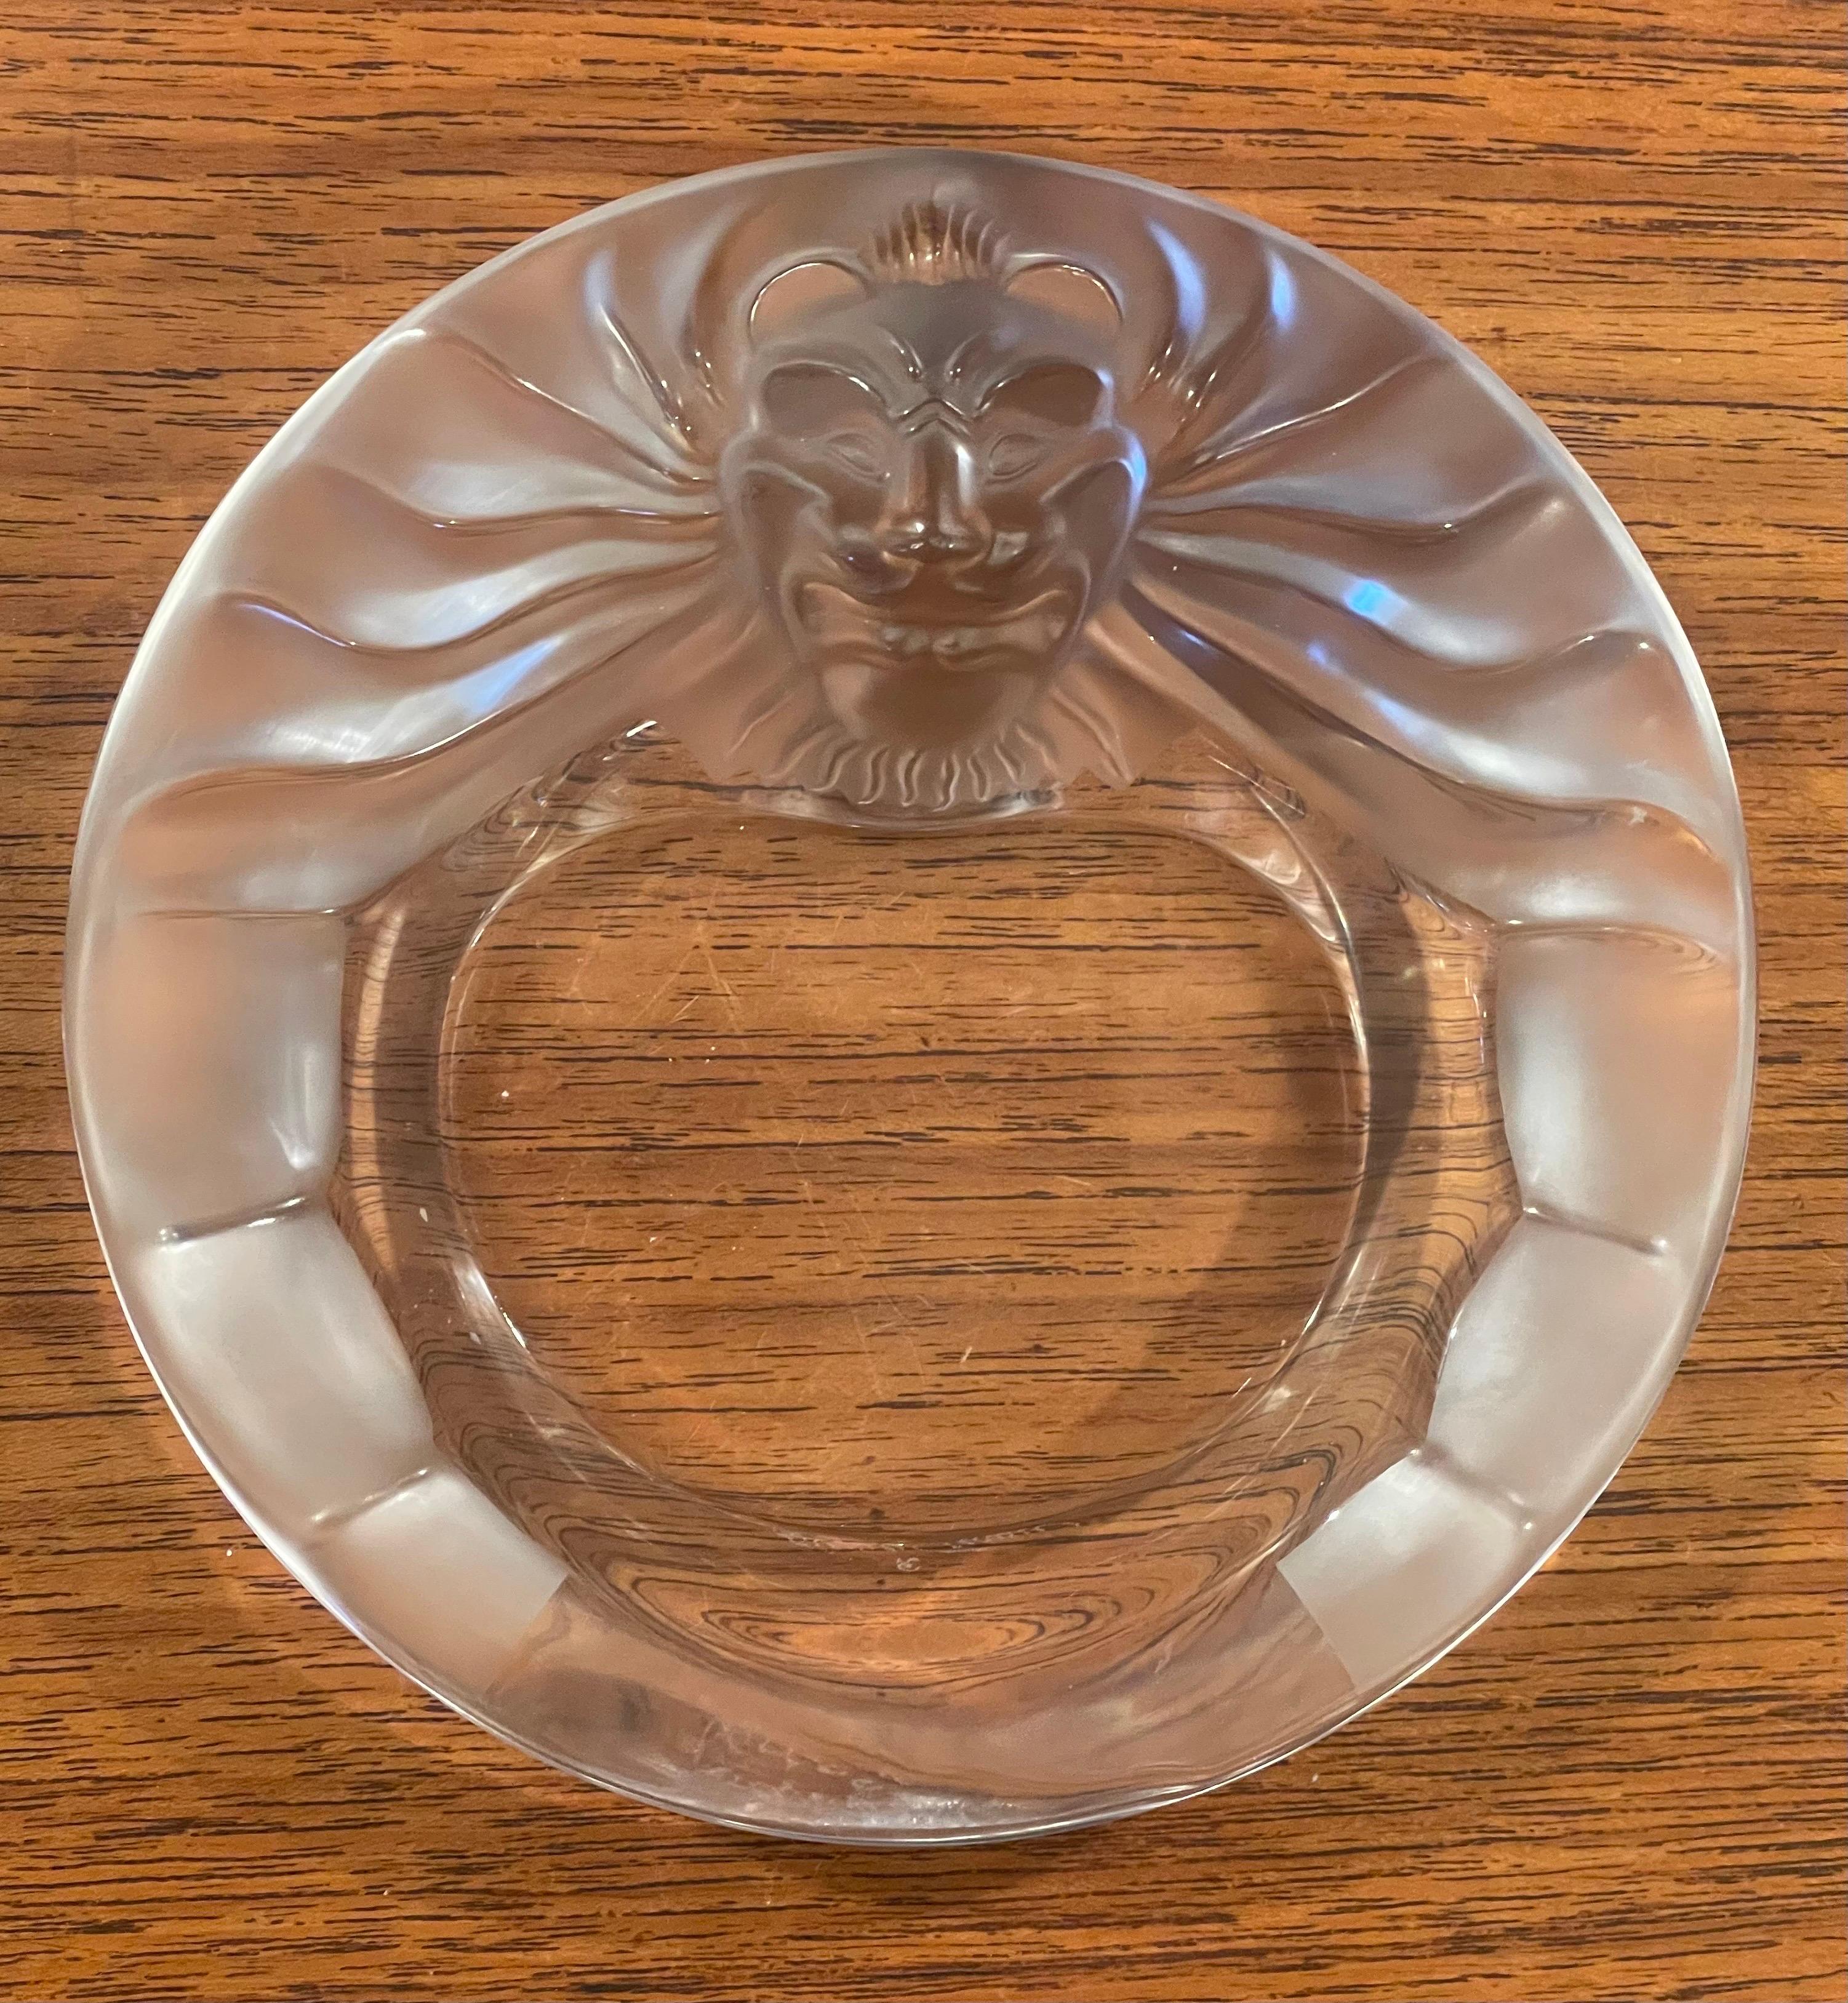 Gorgeous lion head crystal cigar ashtray / bowl by Lalique of France, circa 2000s. This stunning piece features a raised lion head with contrast in clear and frosted texture. The piece measures 5.75